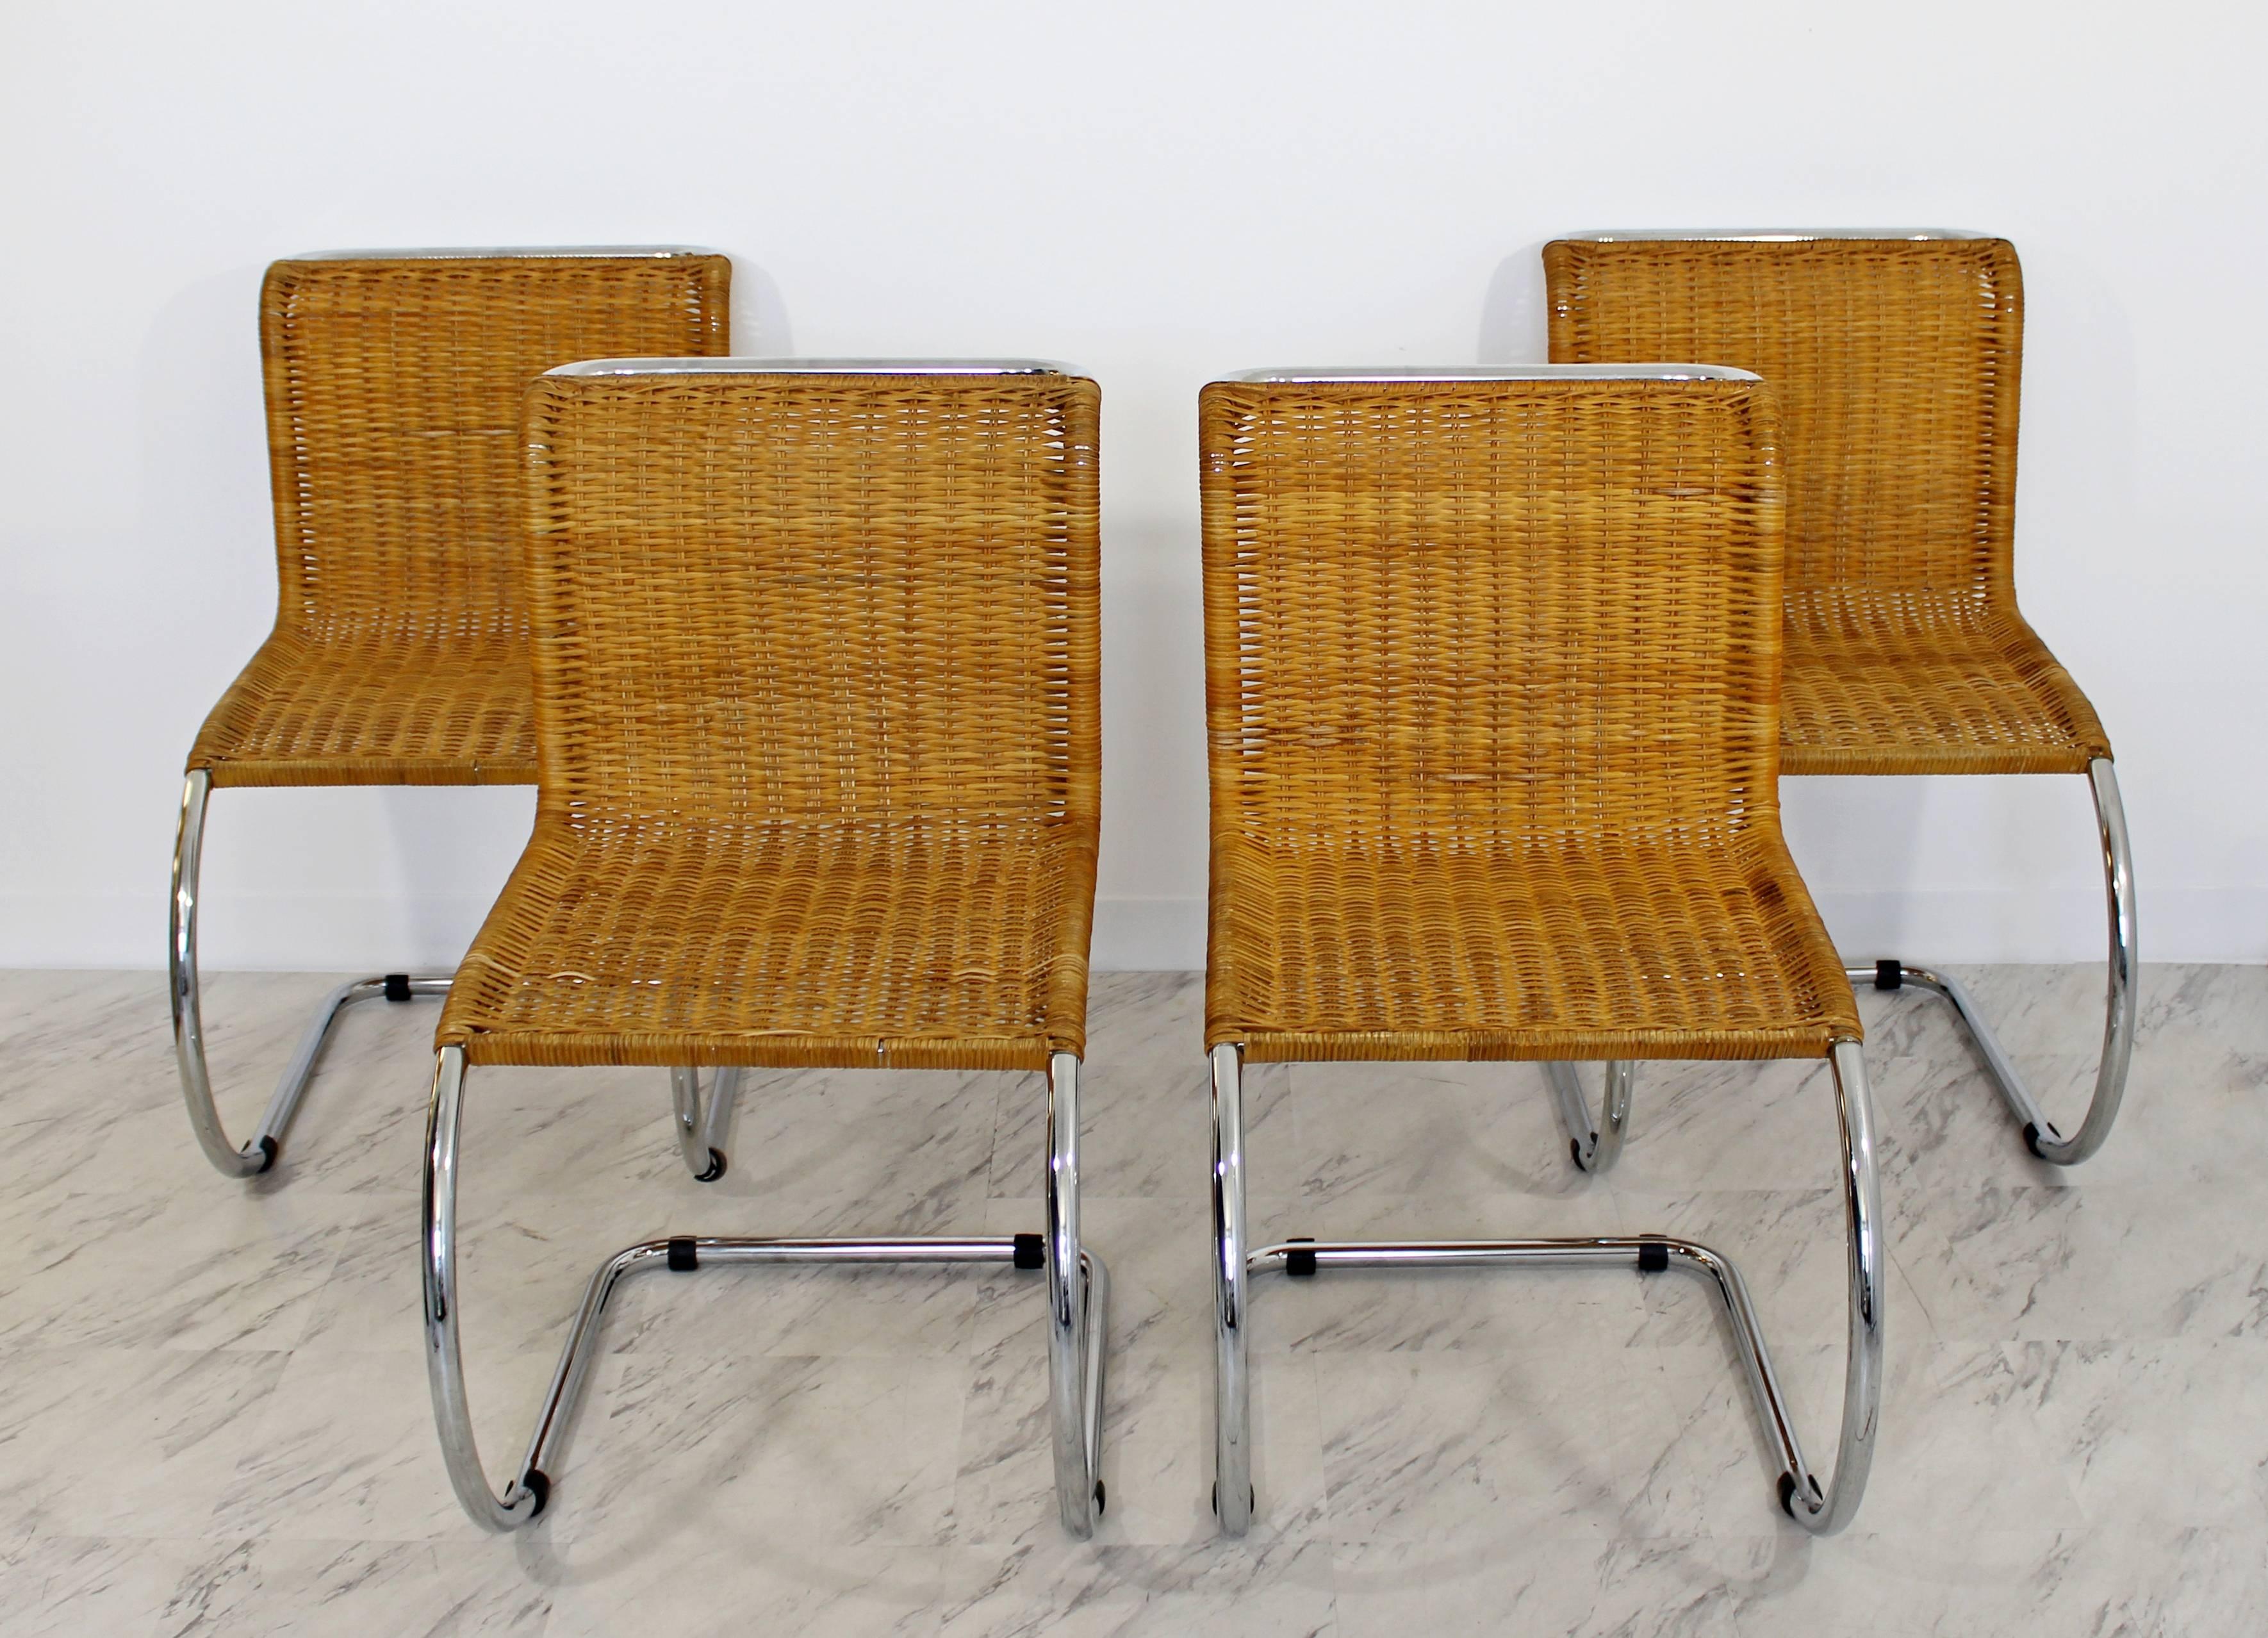 For your consideration is an incredible set of four, cantilever side chairs, made of wicker/cane and chrome mr10, by Ludwig Mies van der Rohe, circa 1970s, made in Italy. In excellent condition. Just came back from being professionally recaned. The